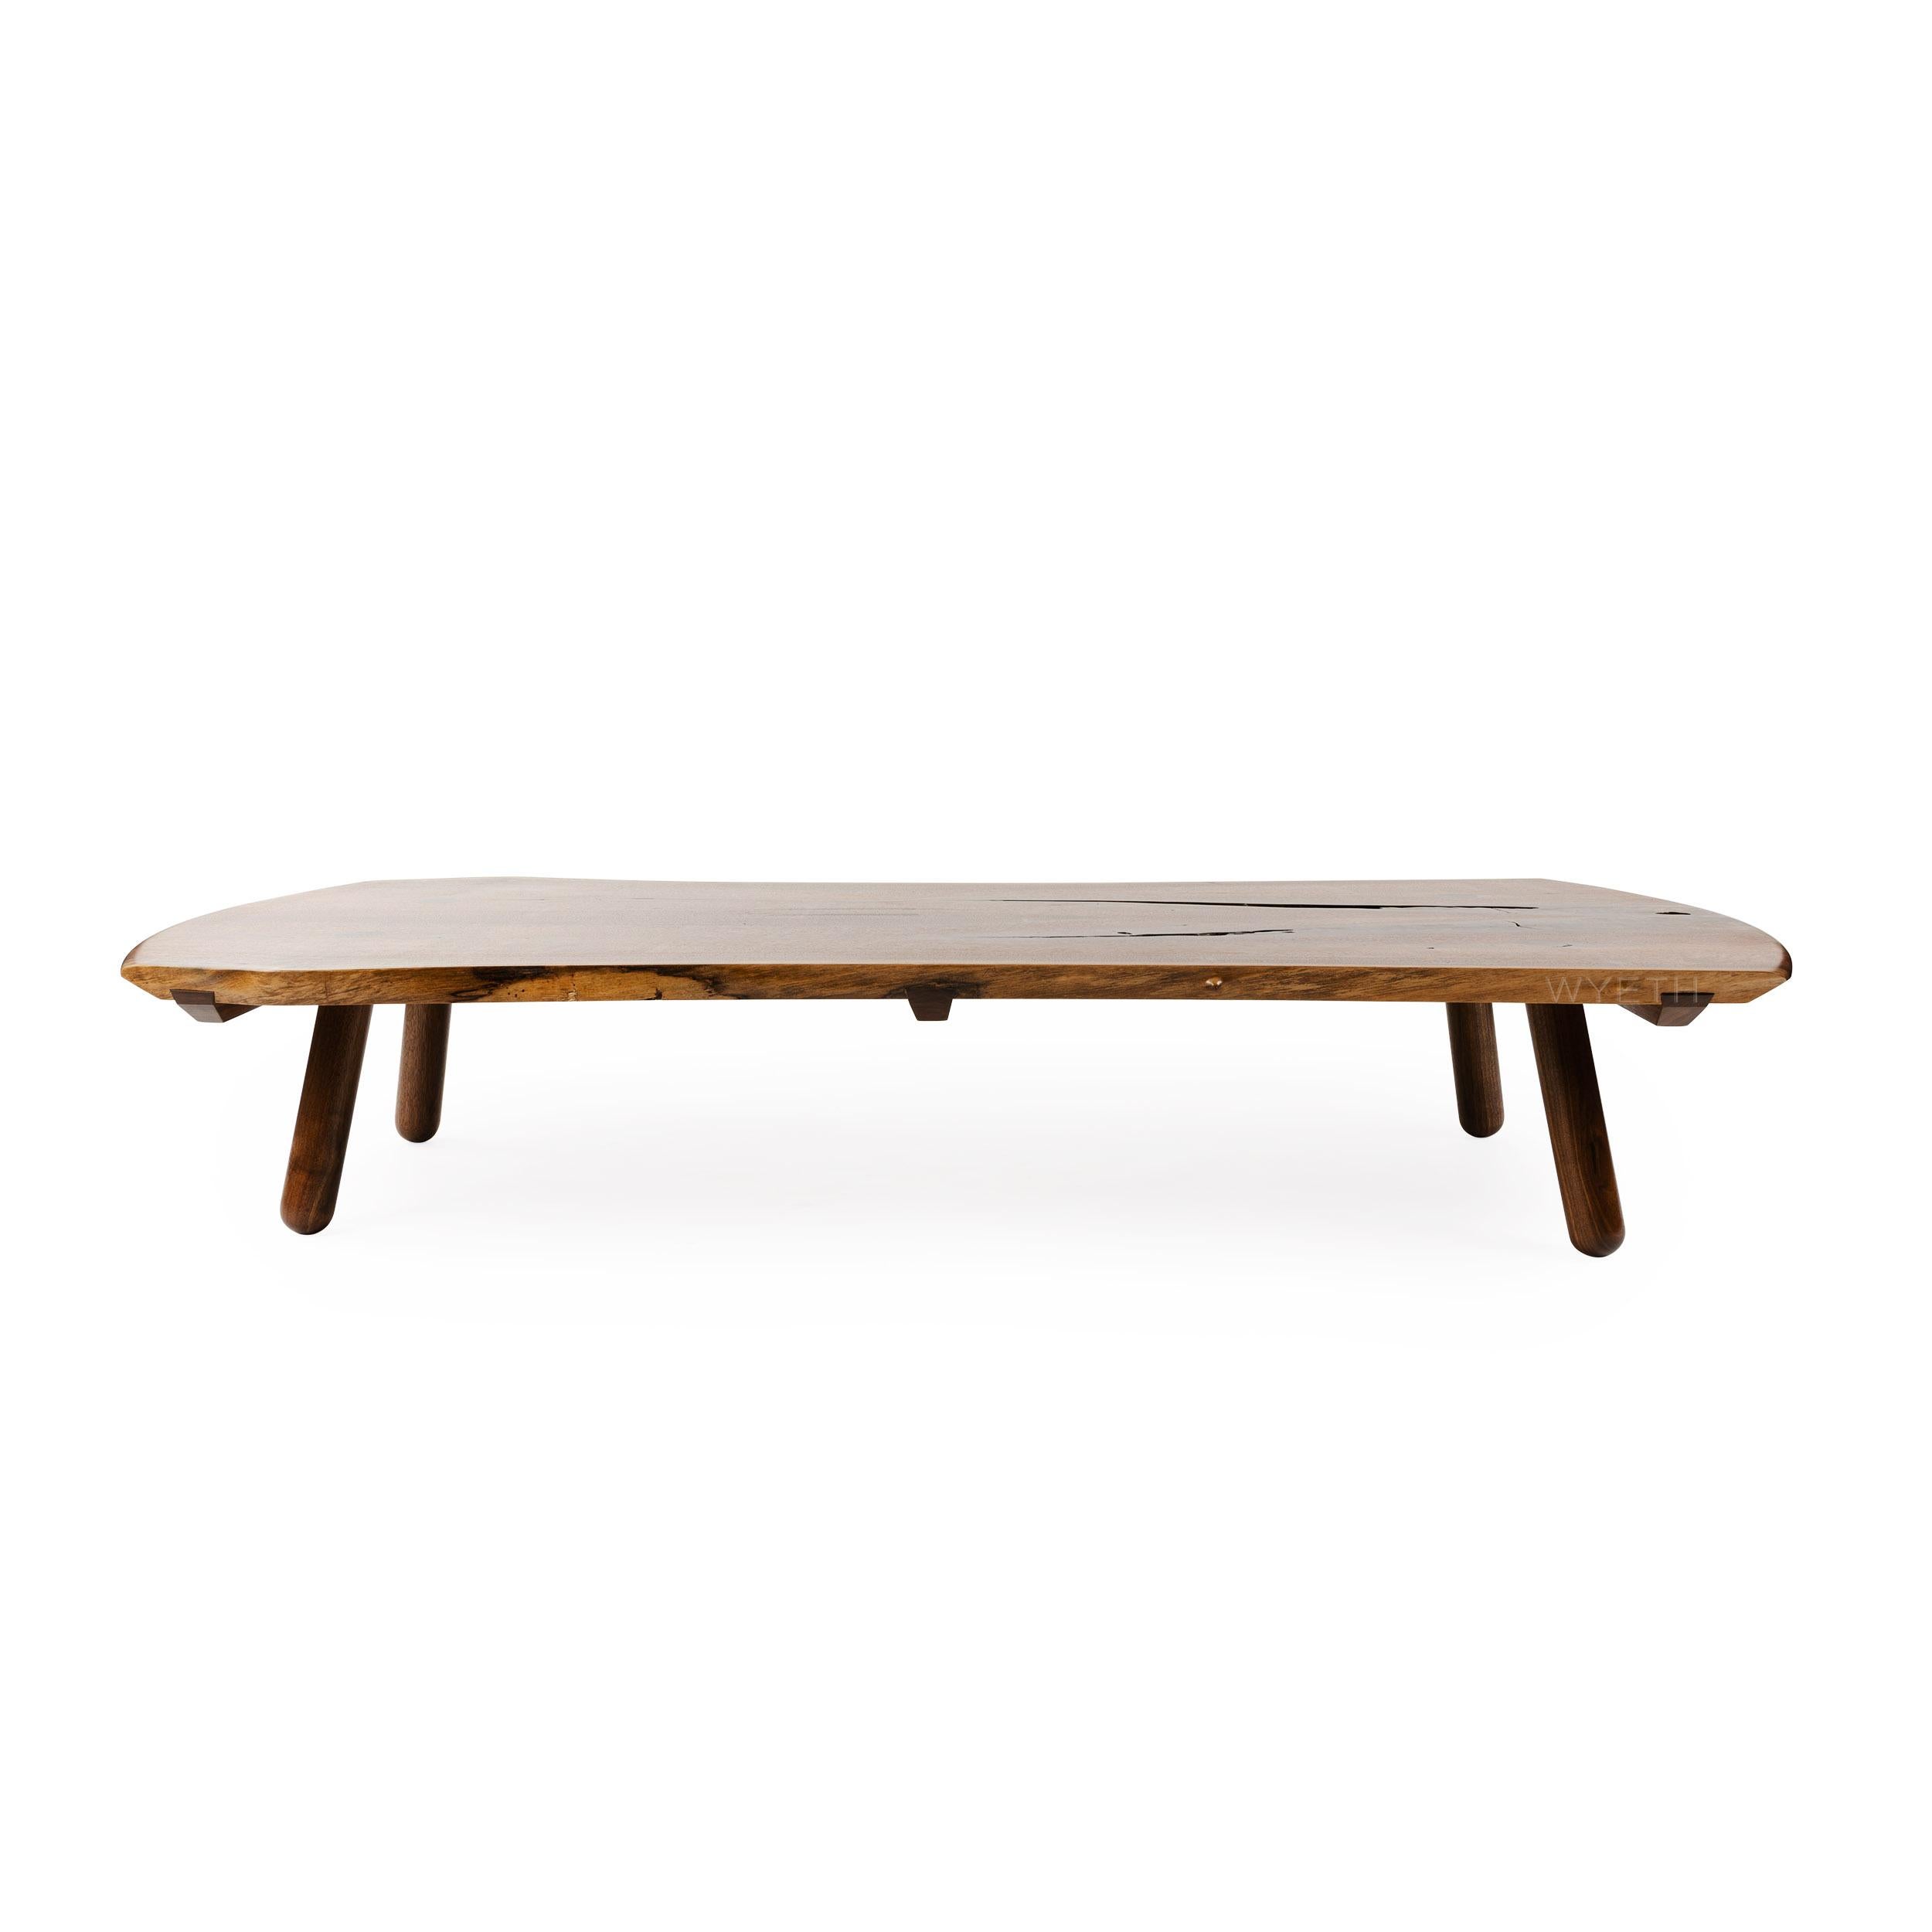 A unique handmade low coffee / cocktail table in bookmatched solid walnut with a rectangular form. The top consists of two (2) solid boards joined together with sliding dovetail stretchers and exposed natural edges. Four (4) substantial turned legs